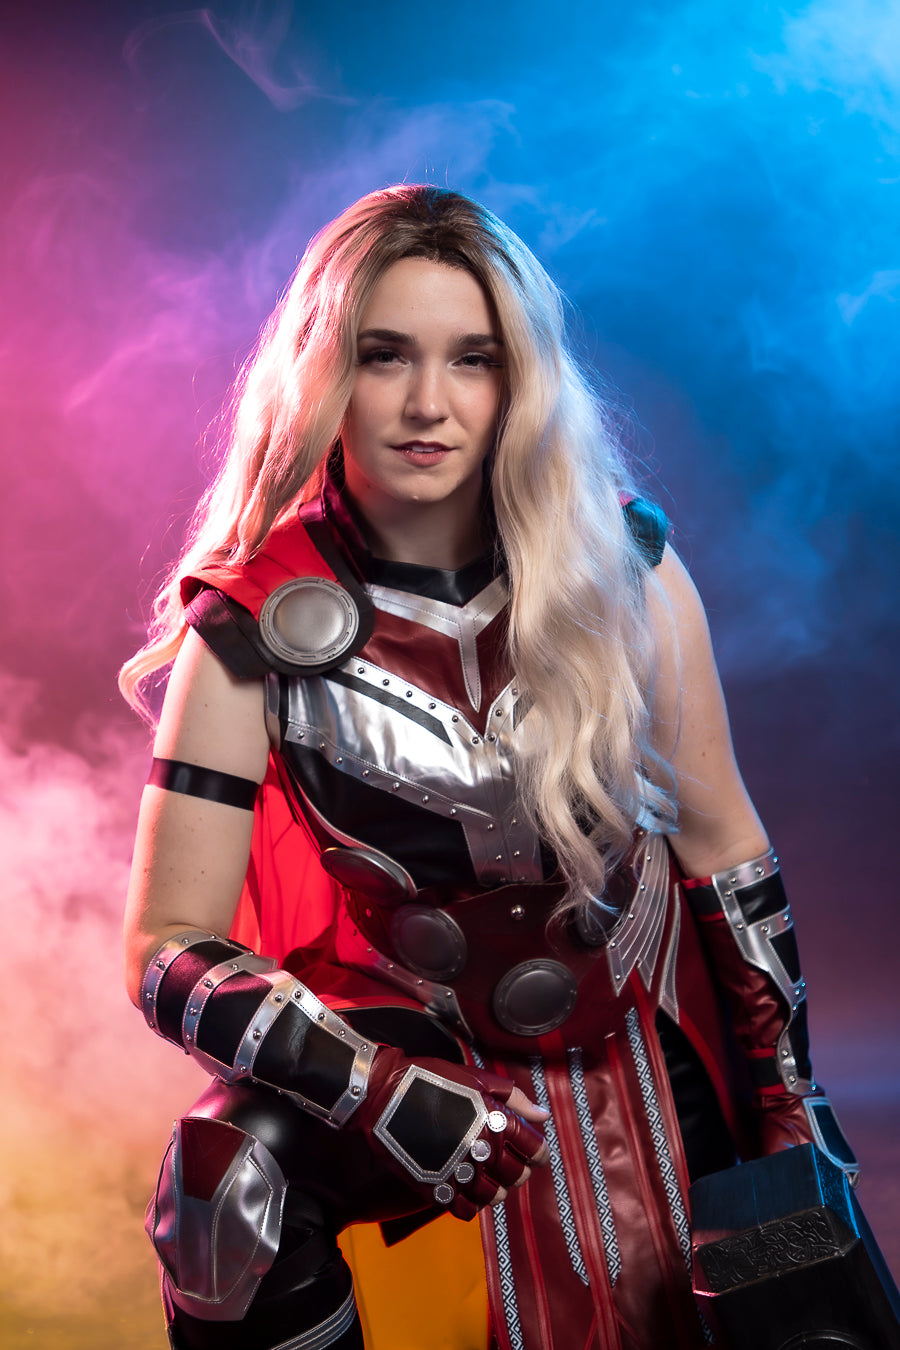 Mighty Thor Costume Hire or Cosplay, plus Makeup and Photography. Proudly by and available at, Little Shop of Horrors Costumery 6/1 Watt Rd Mornington, Frankston & Melbourne